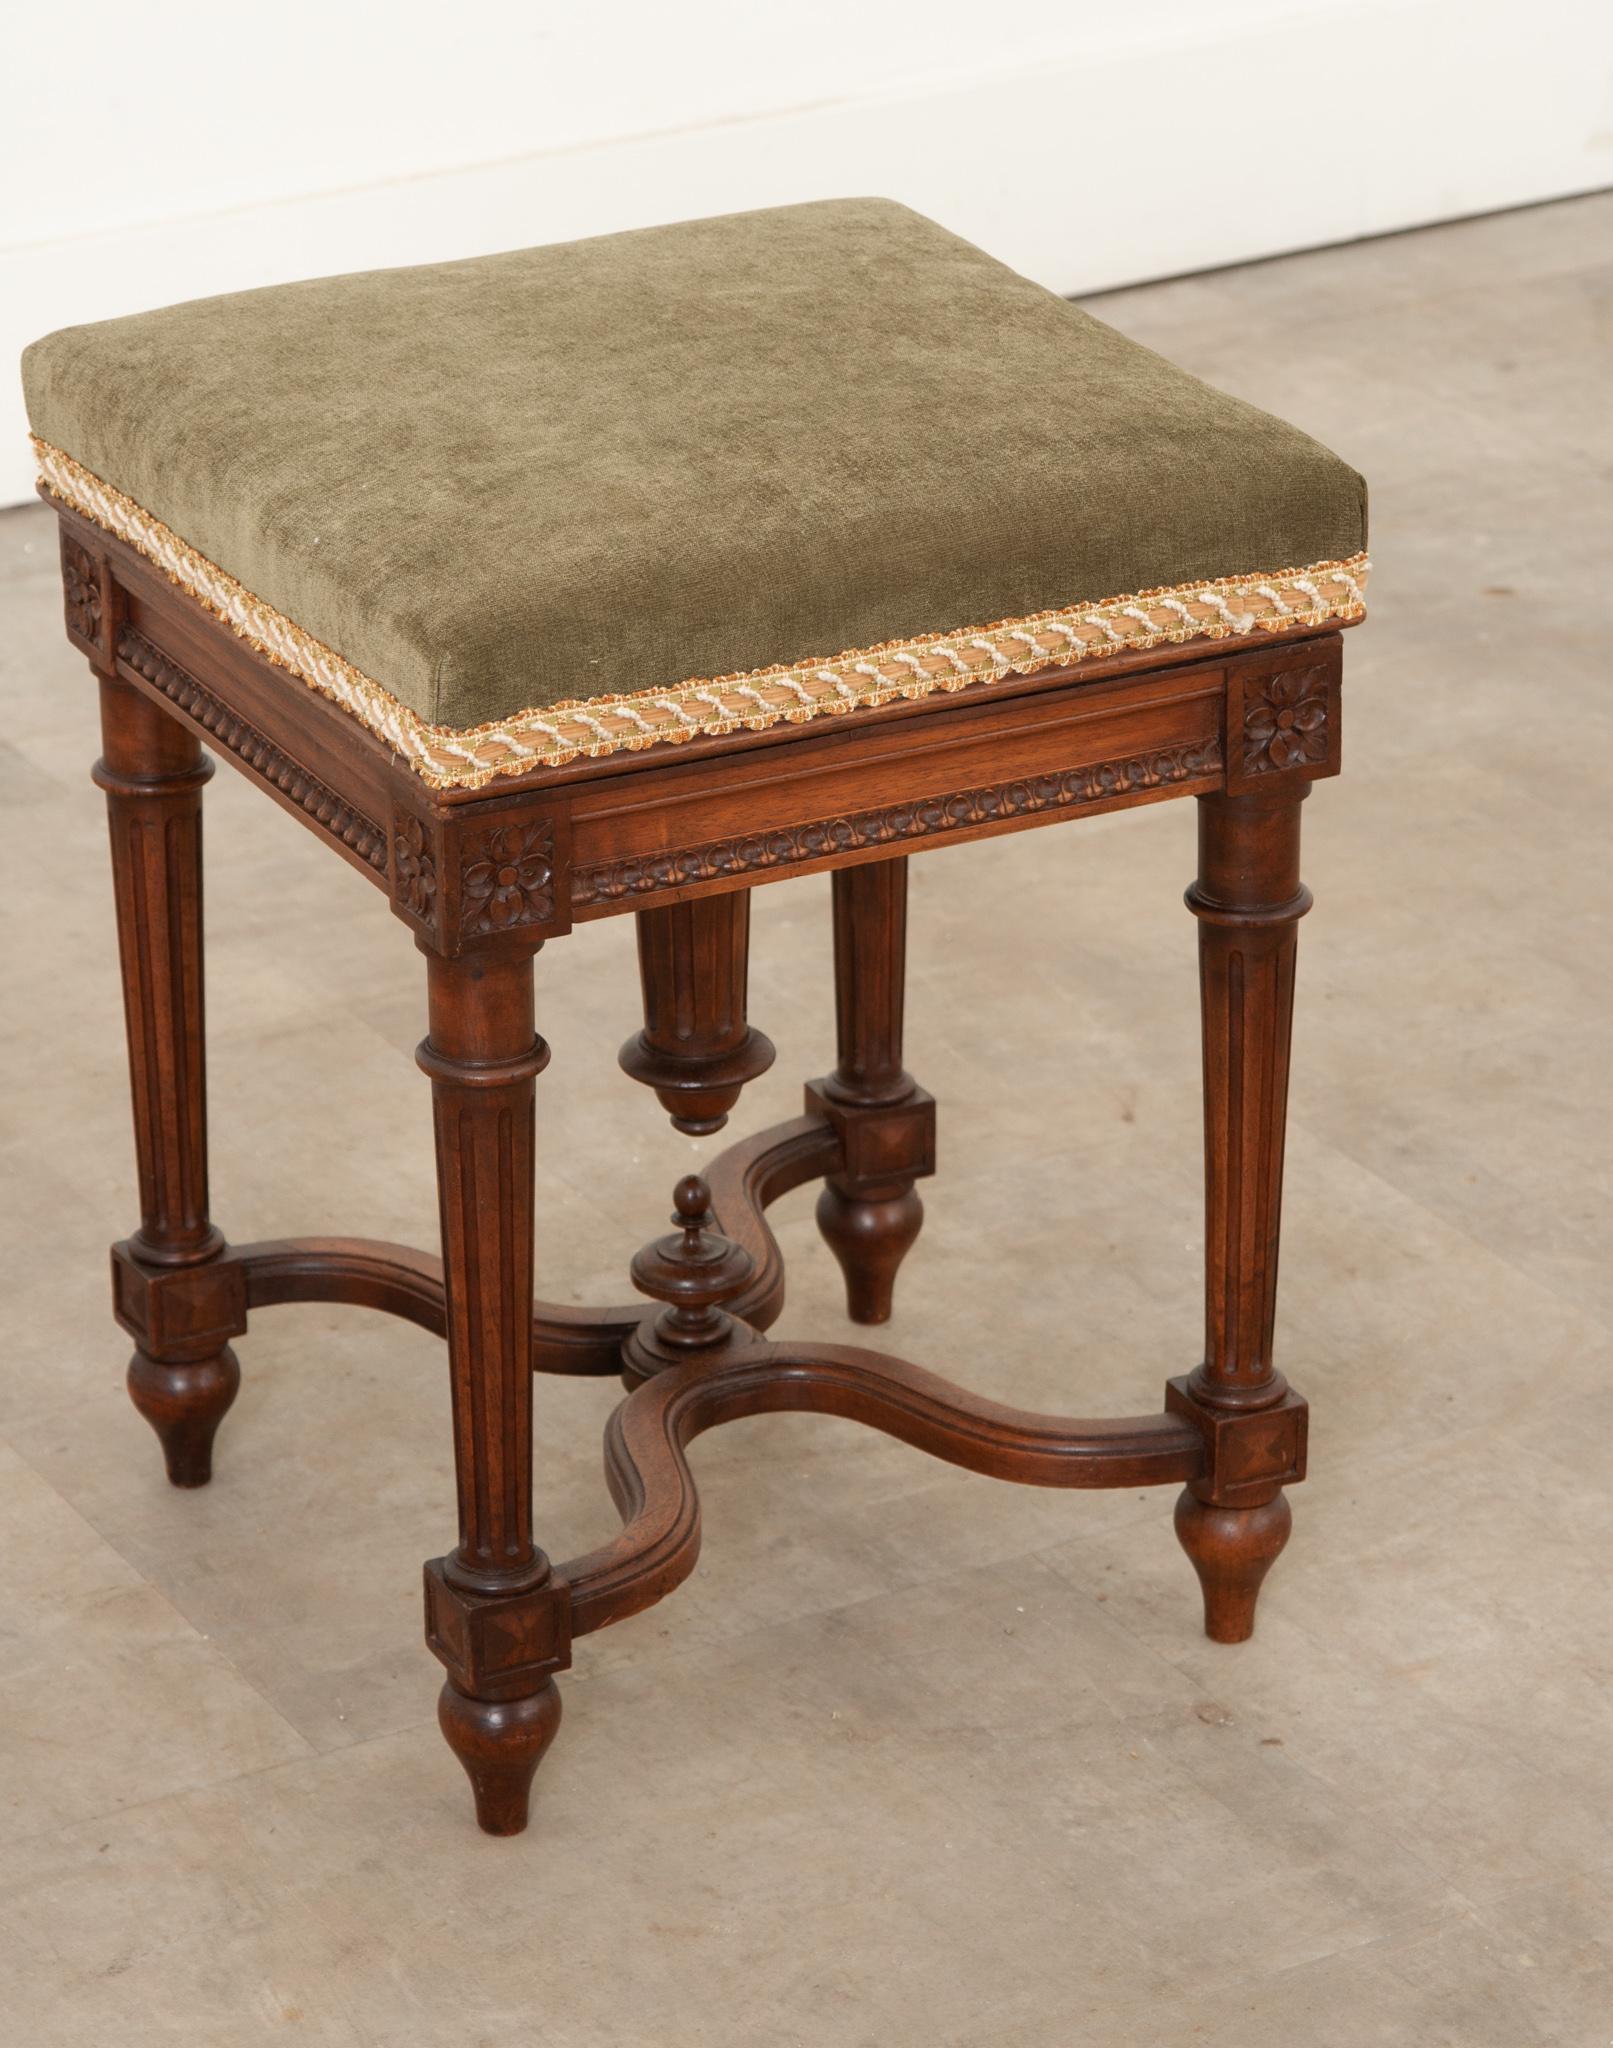 This French 19th century oak piano stool is an elegant and classic example of Louis XVI style. Made in France, the piano stool was hand-crafted out of solid oak for a sturdy build, and is accented with intricately carved details on the corners that